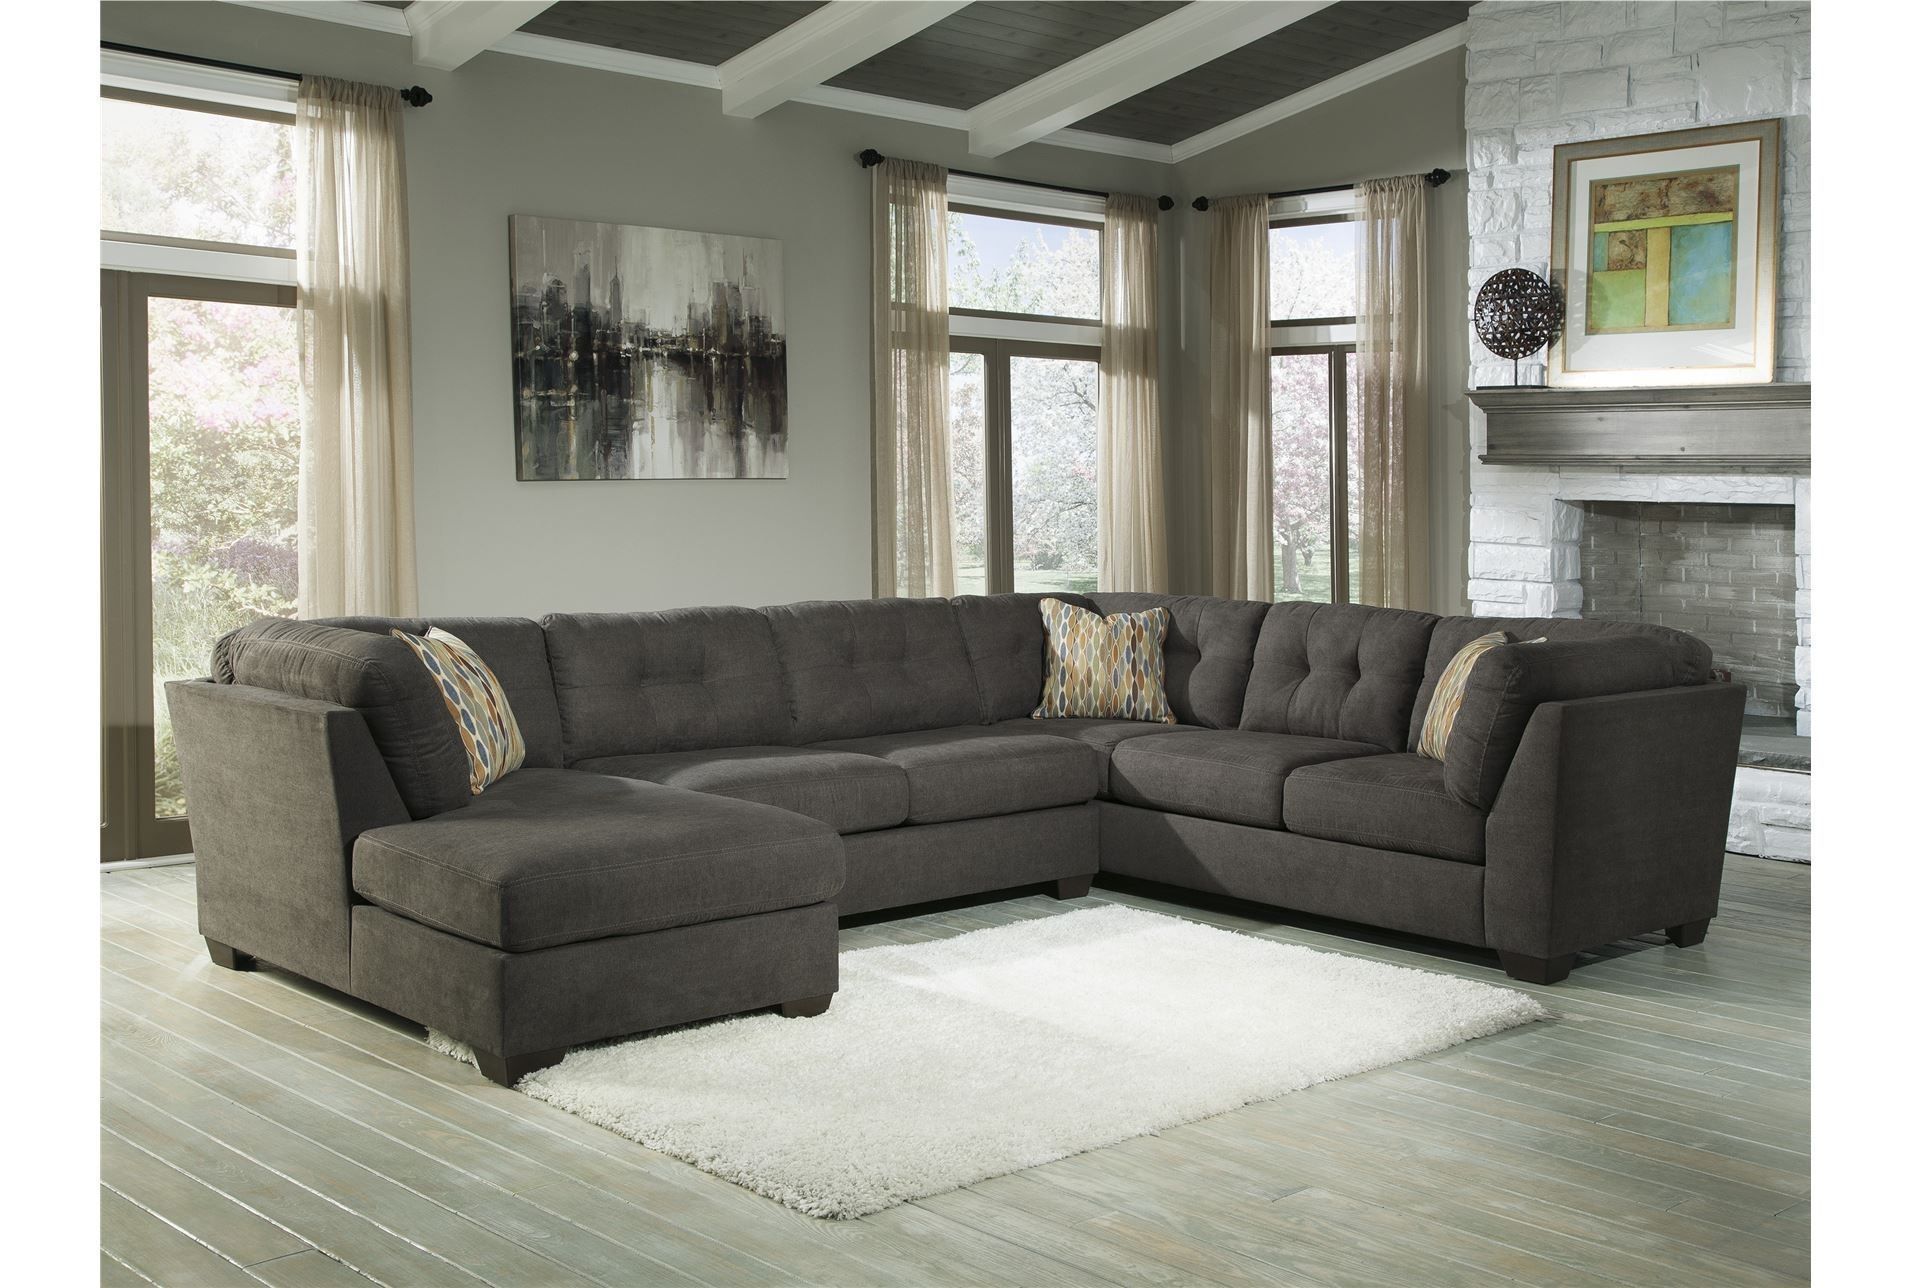 Delta City Steel 3 Piece Sectional W/laf Chaise  Living Room Option In Pensacola Fl Sectional Sofas (Photo 6 of 10)